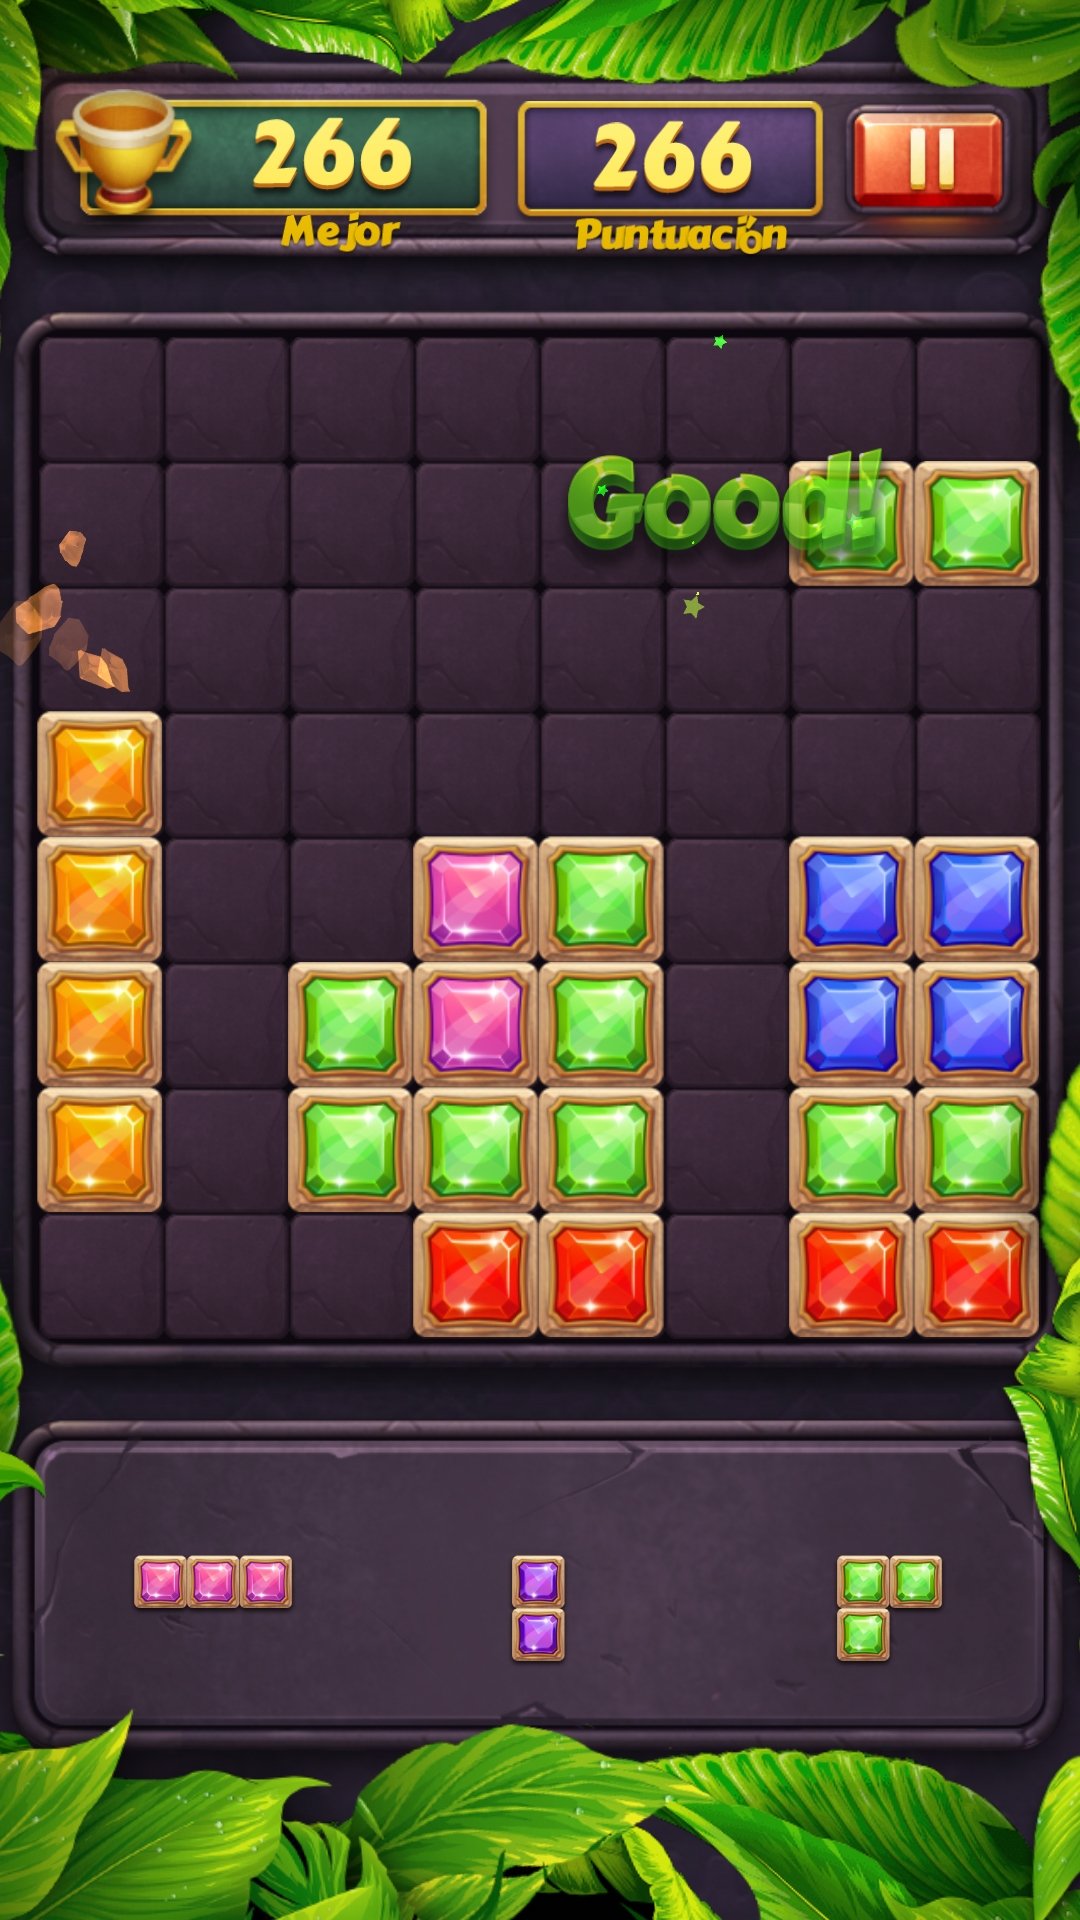 How to Play Block Puzzle Jewel - Free Tetris Game 